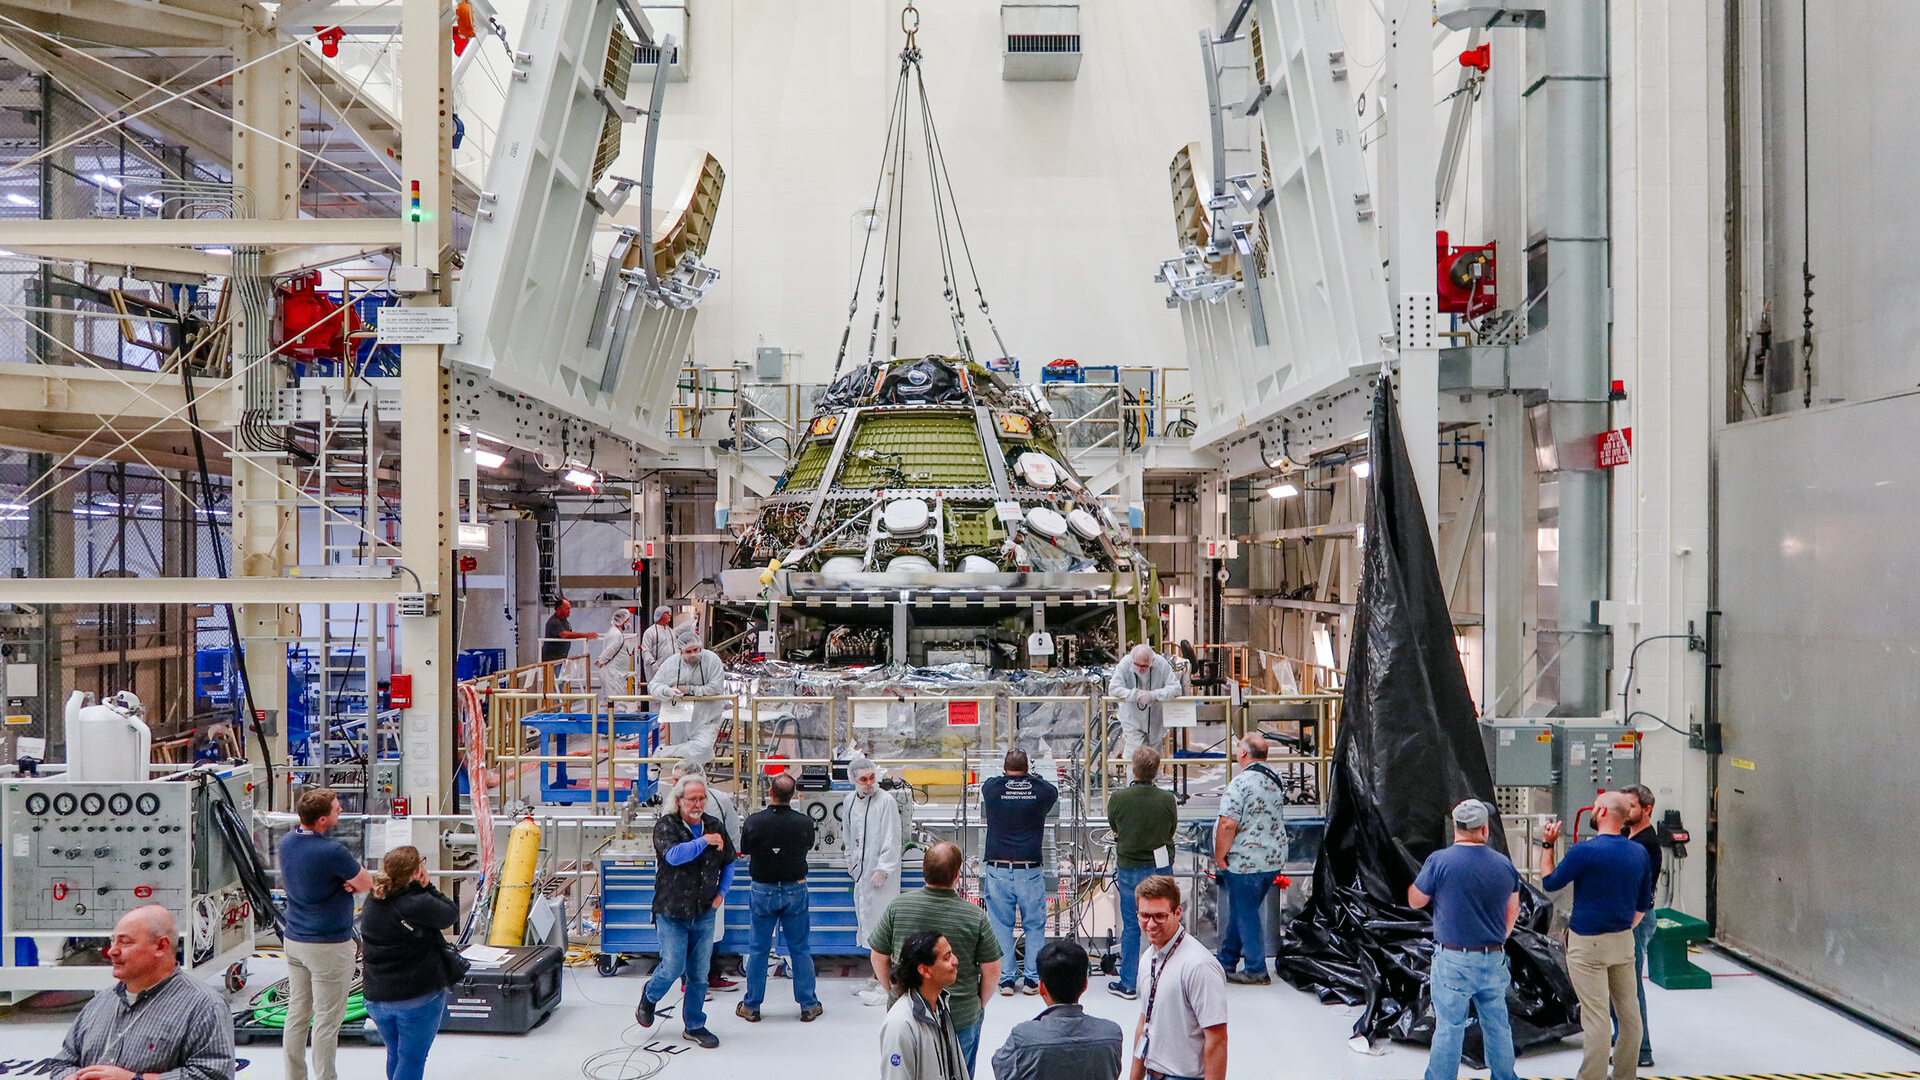 Artemis 2 Orion spacecraft comes together ahead of 2024 moon mission (photos)